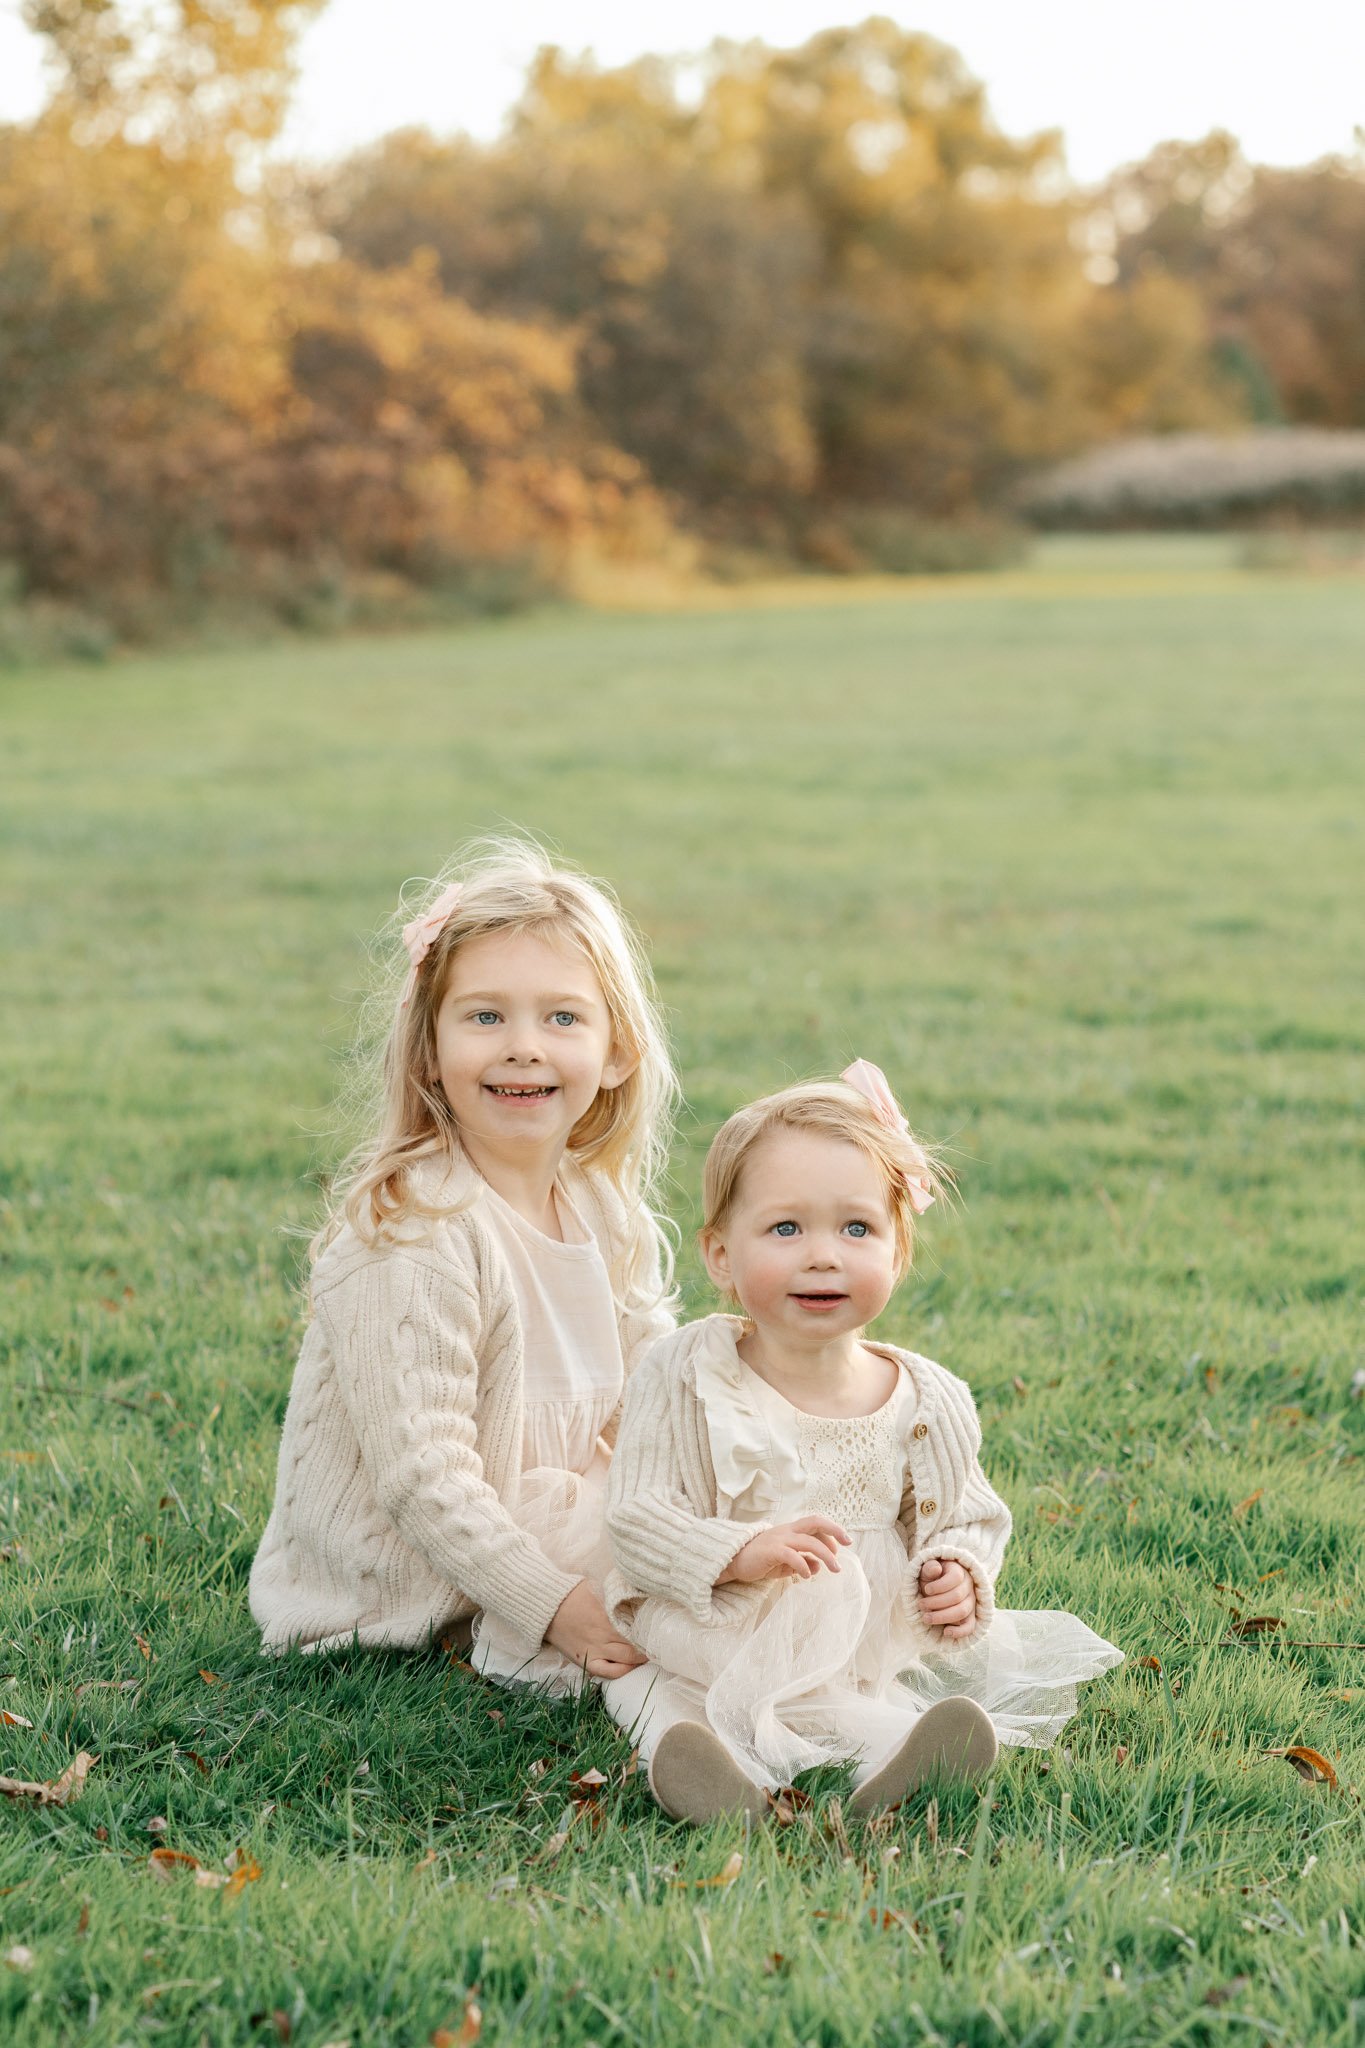  New Jersey family photographer Nicole Hawkins Photography captures two sisters in white dresses sitting on a field of grass. reasons to do fall family pics #NicoleHawkinsPhotography #NicoleHawkinsFamilies #FallFamilyPhotos #FallPortraits #NJFamilyPh